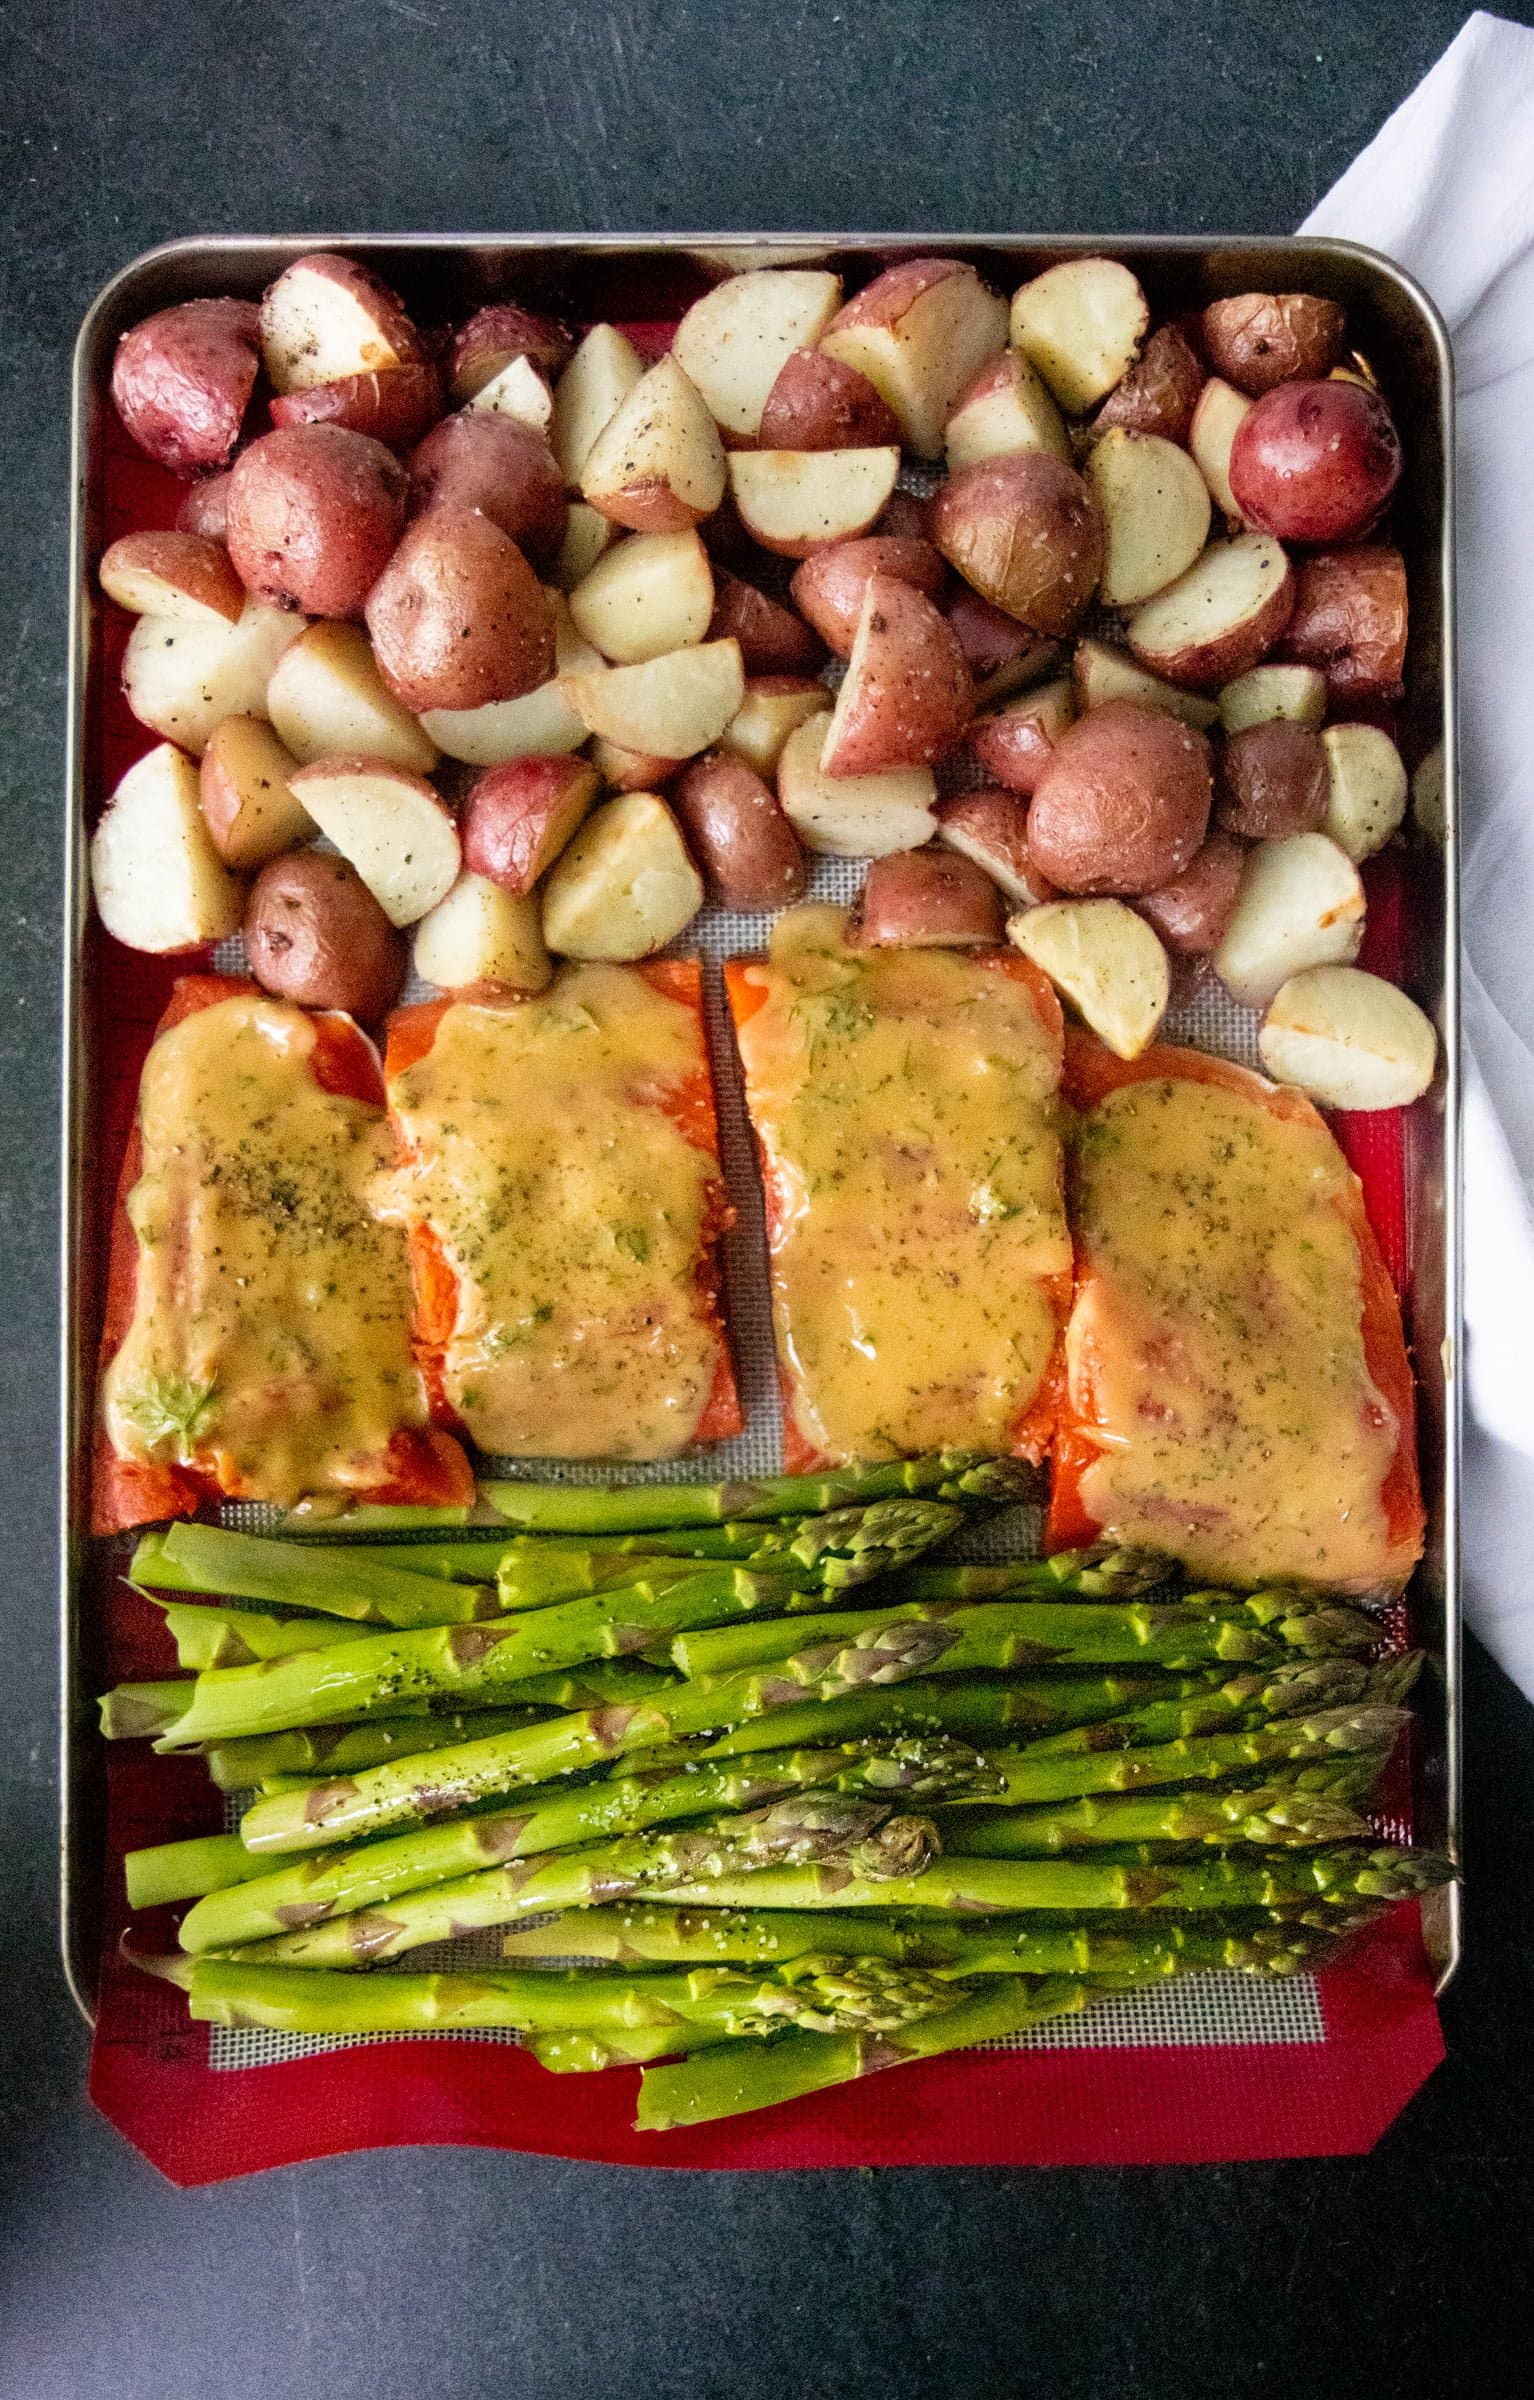 Sheet pan covered with a silicon baking sheet, salmon, asparagus, and potatoes, ready to be cooked.